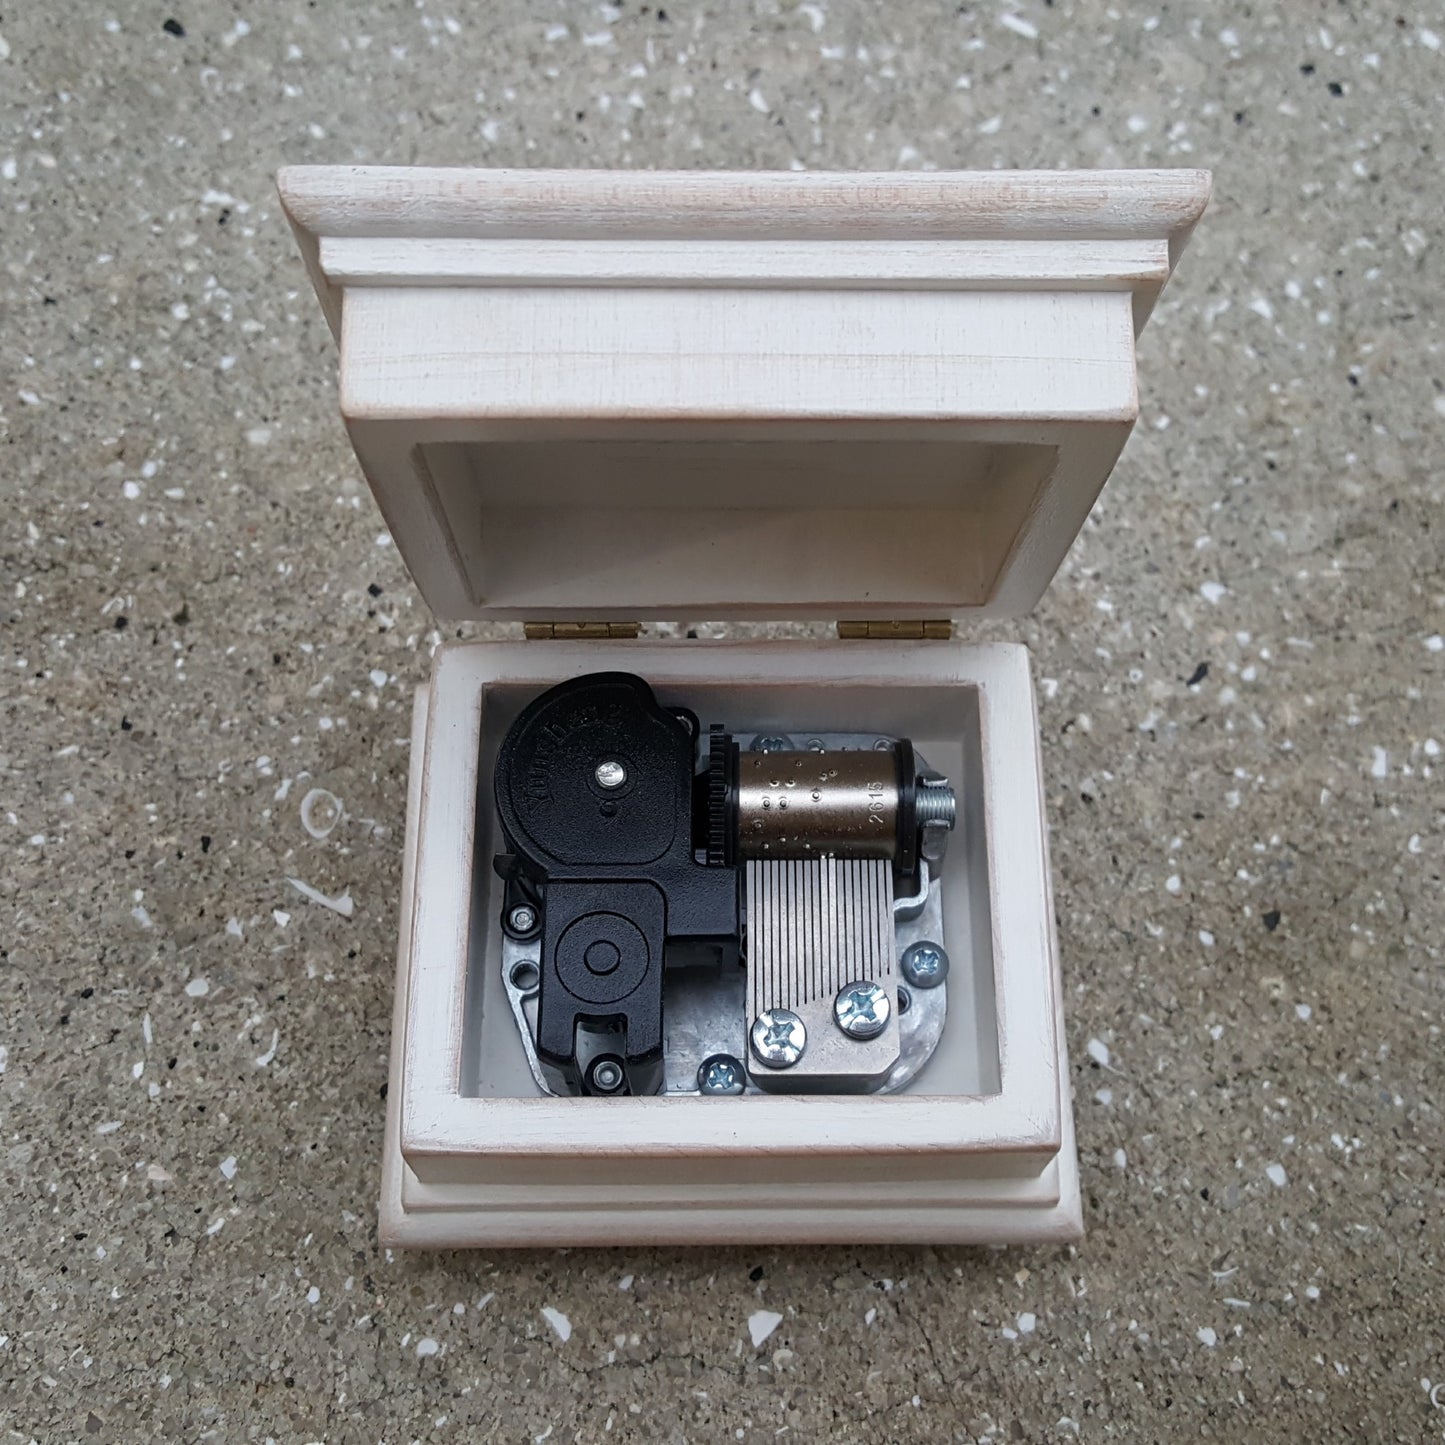 music box with open lid showing music box movement inside